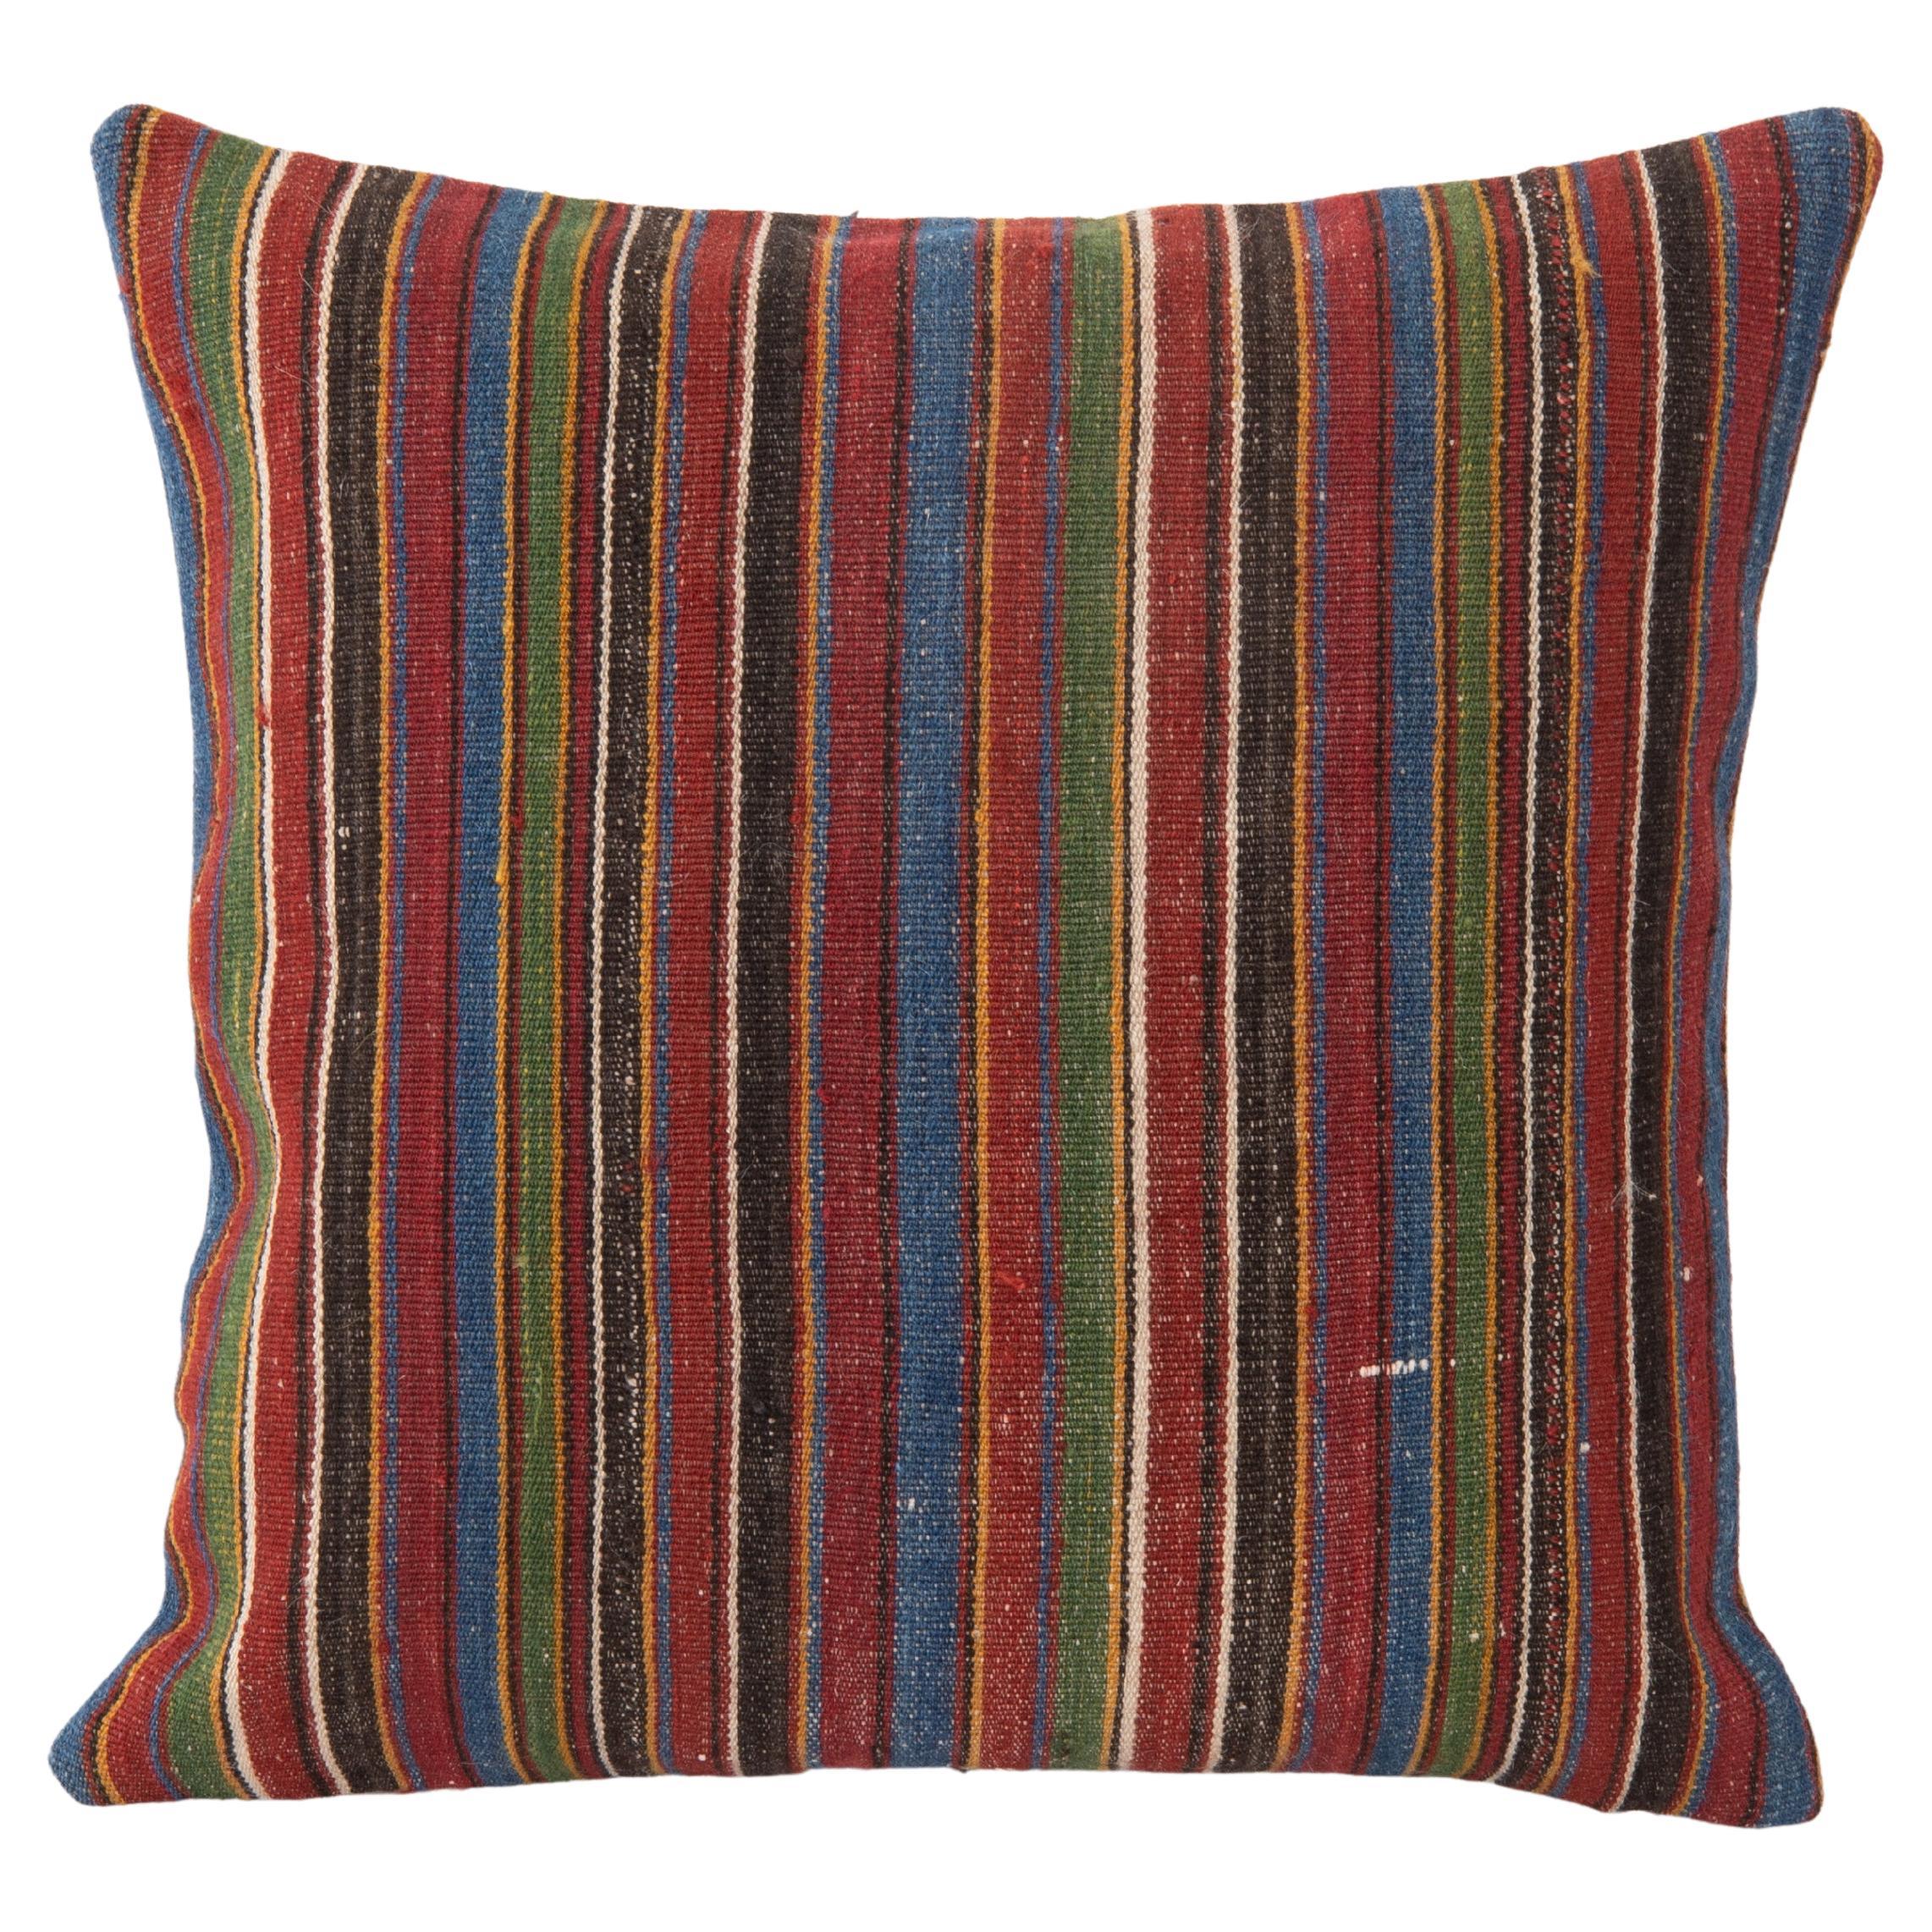 Double Sided Kilim Pillow Cover Made From an Antique Kilim For Sale